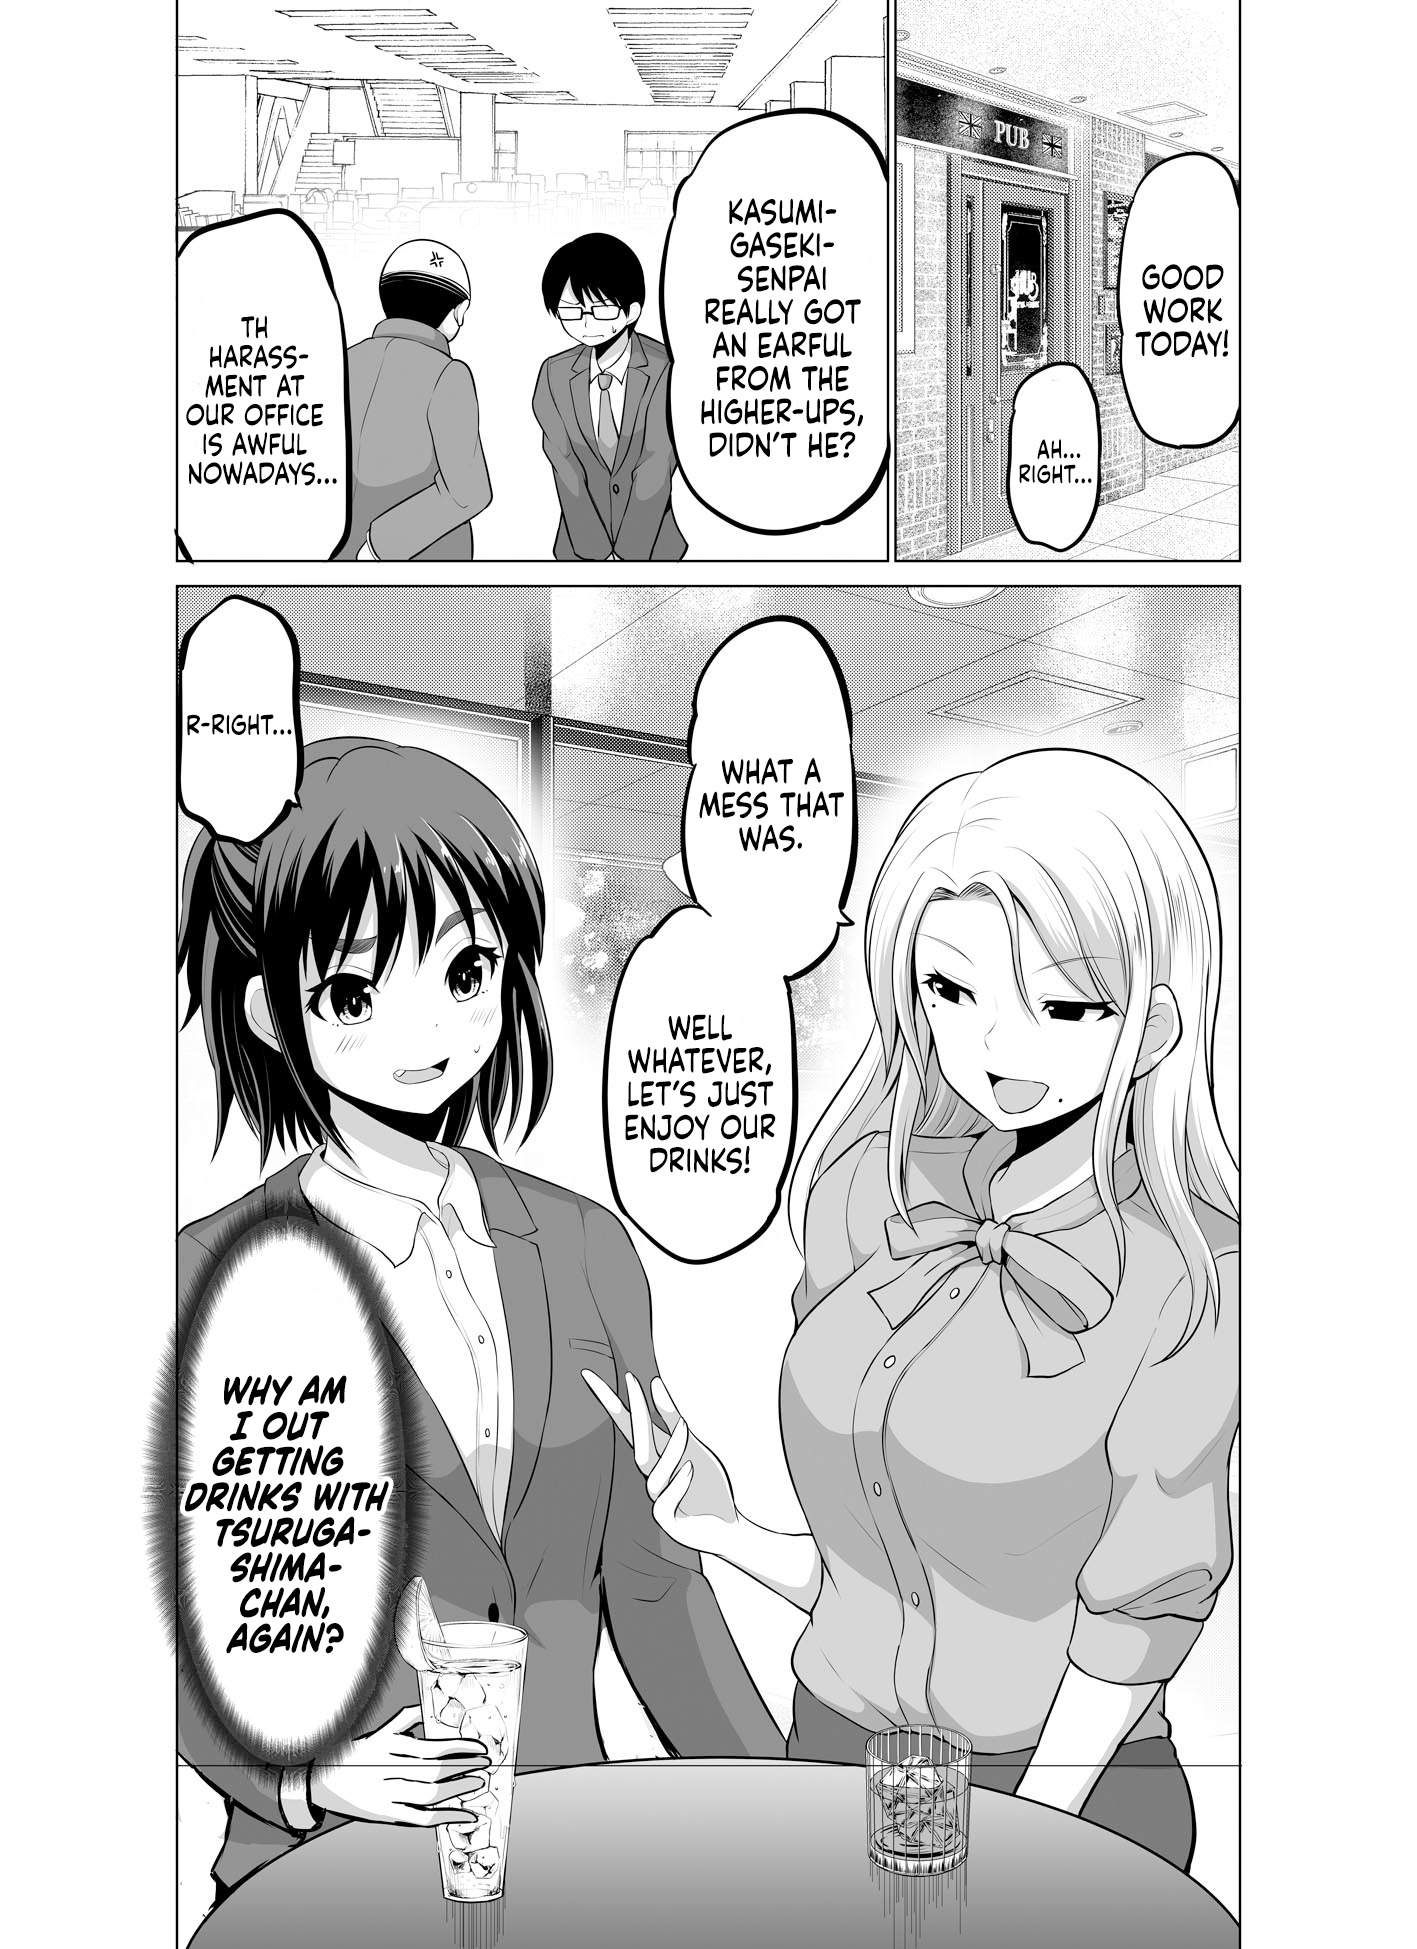 From Misunderstandings To Marriage - Page 1